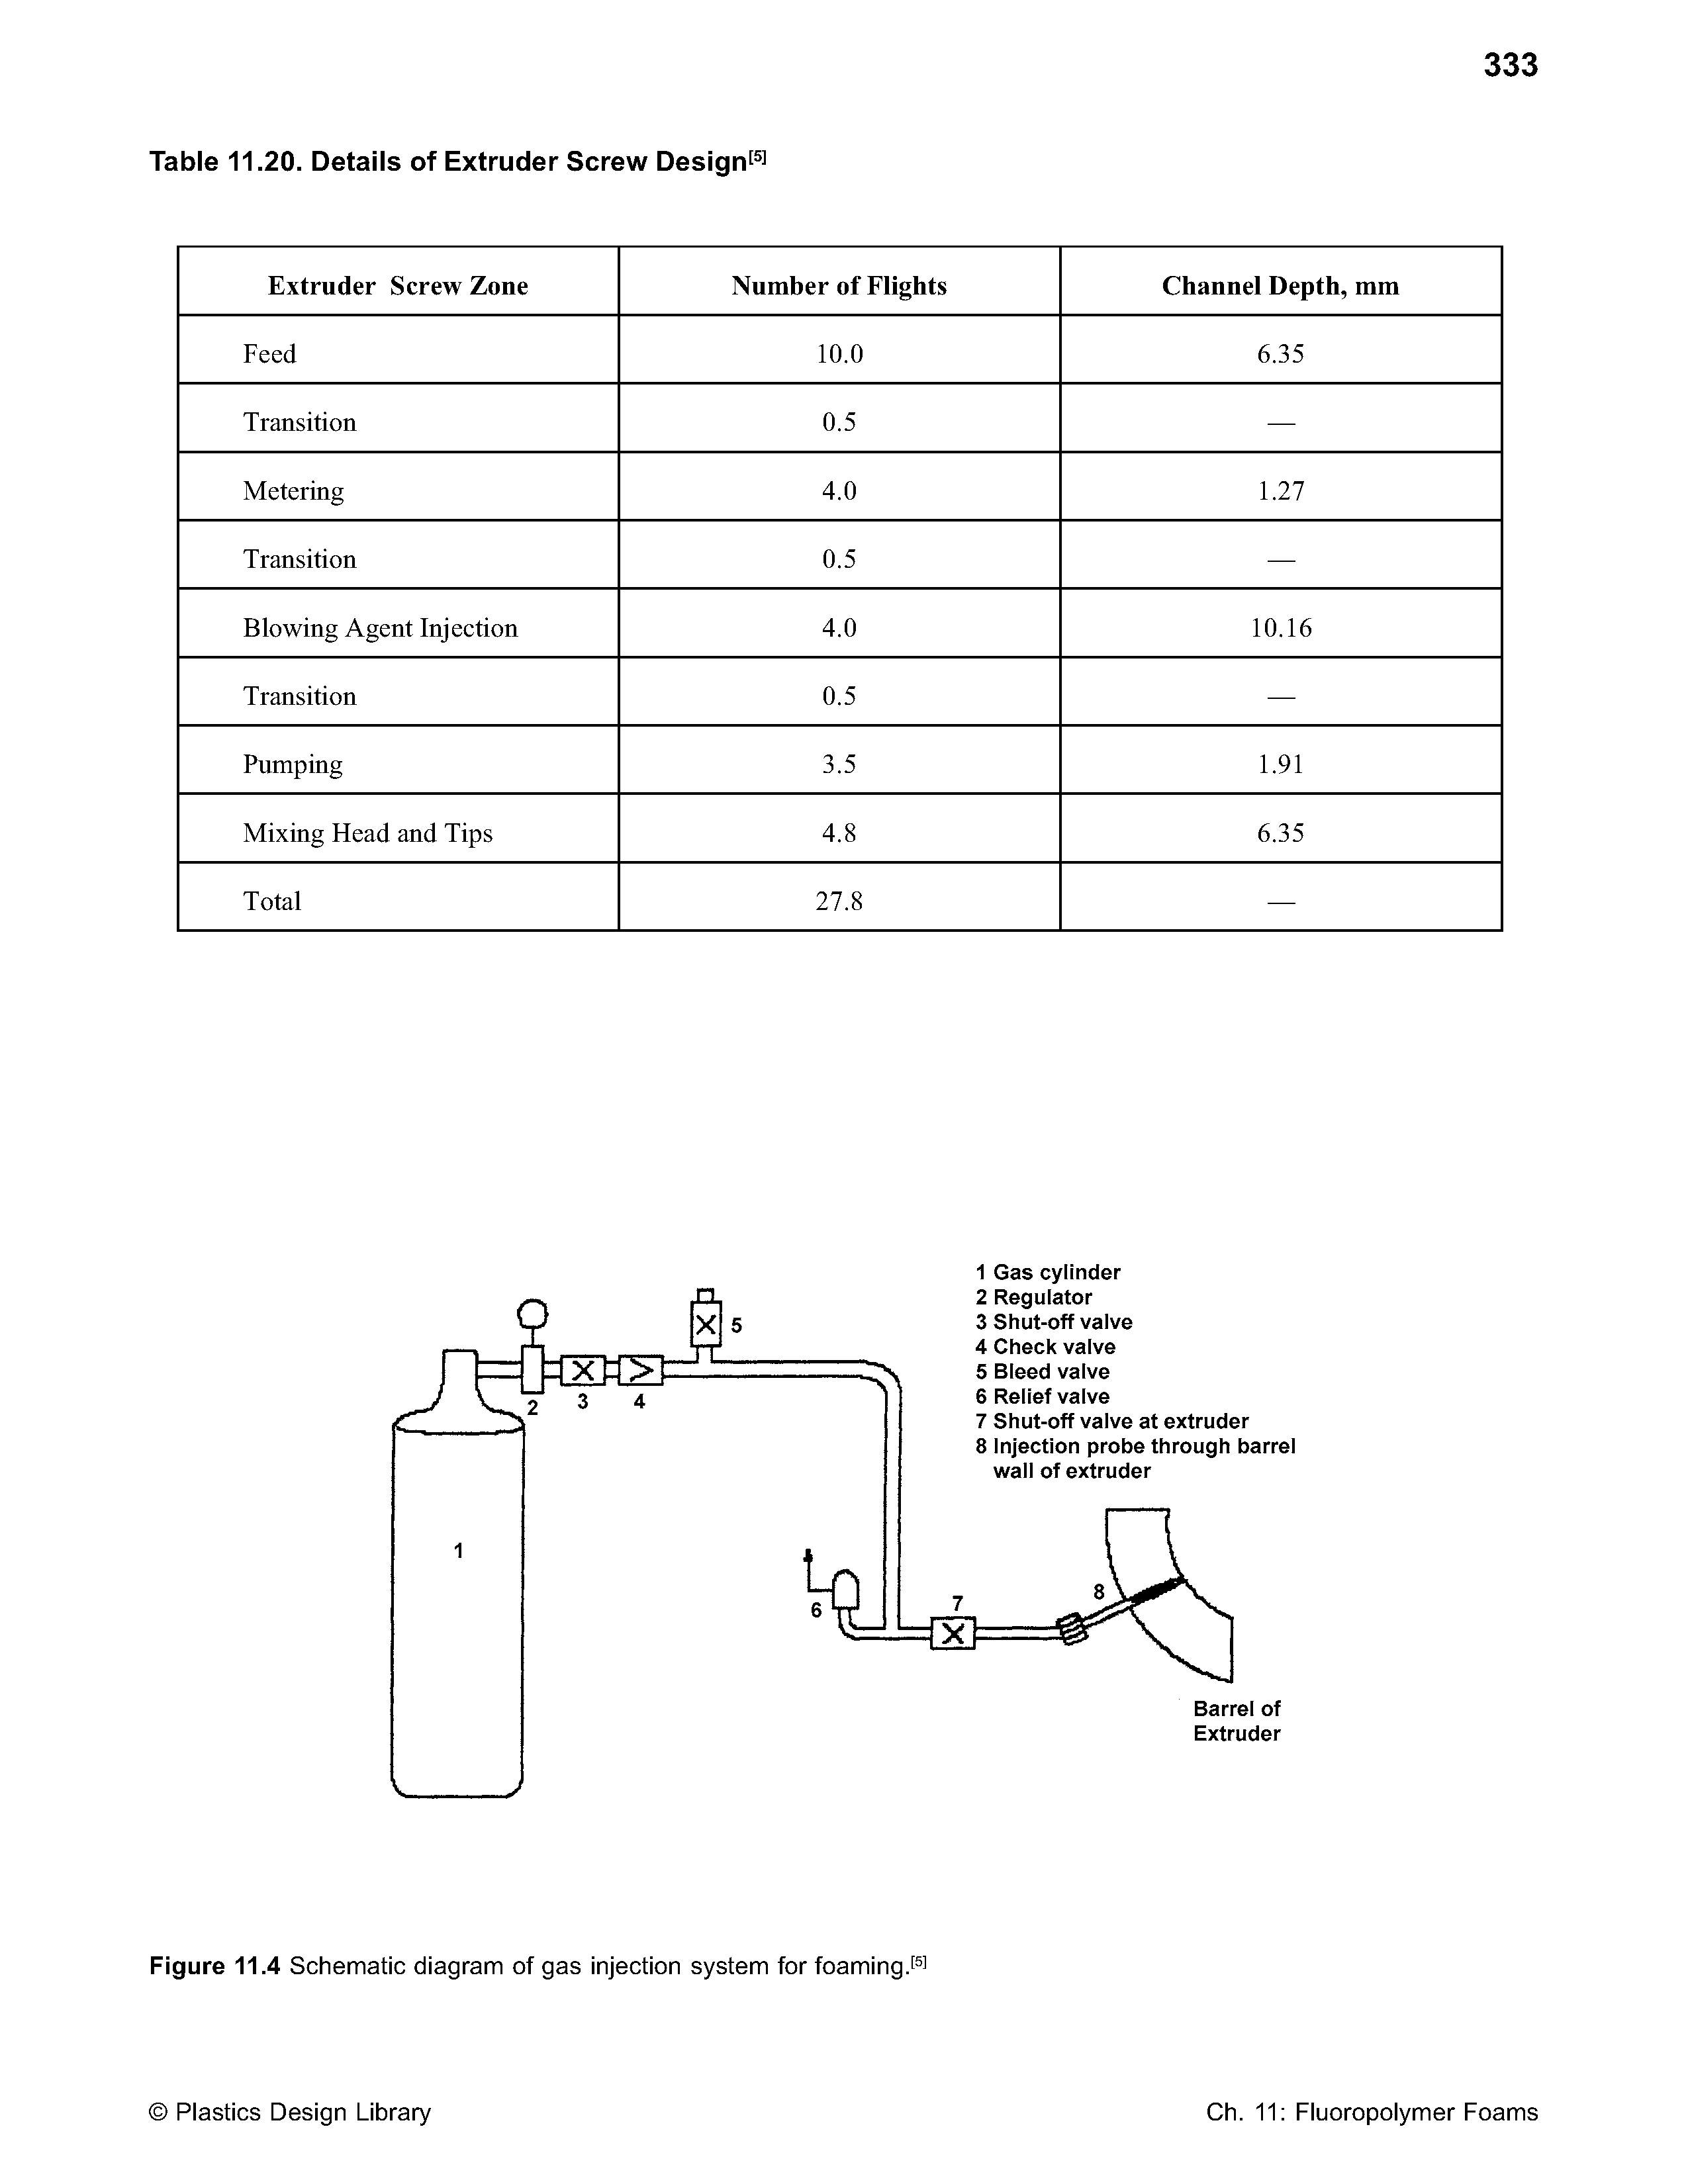 Figure 11.4 Schematic diagram of gas injection system for foaming.